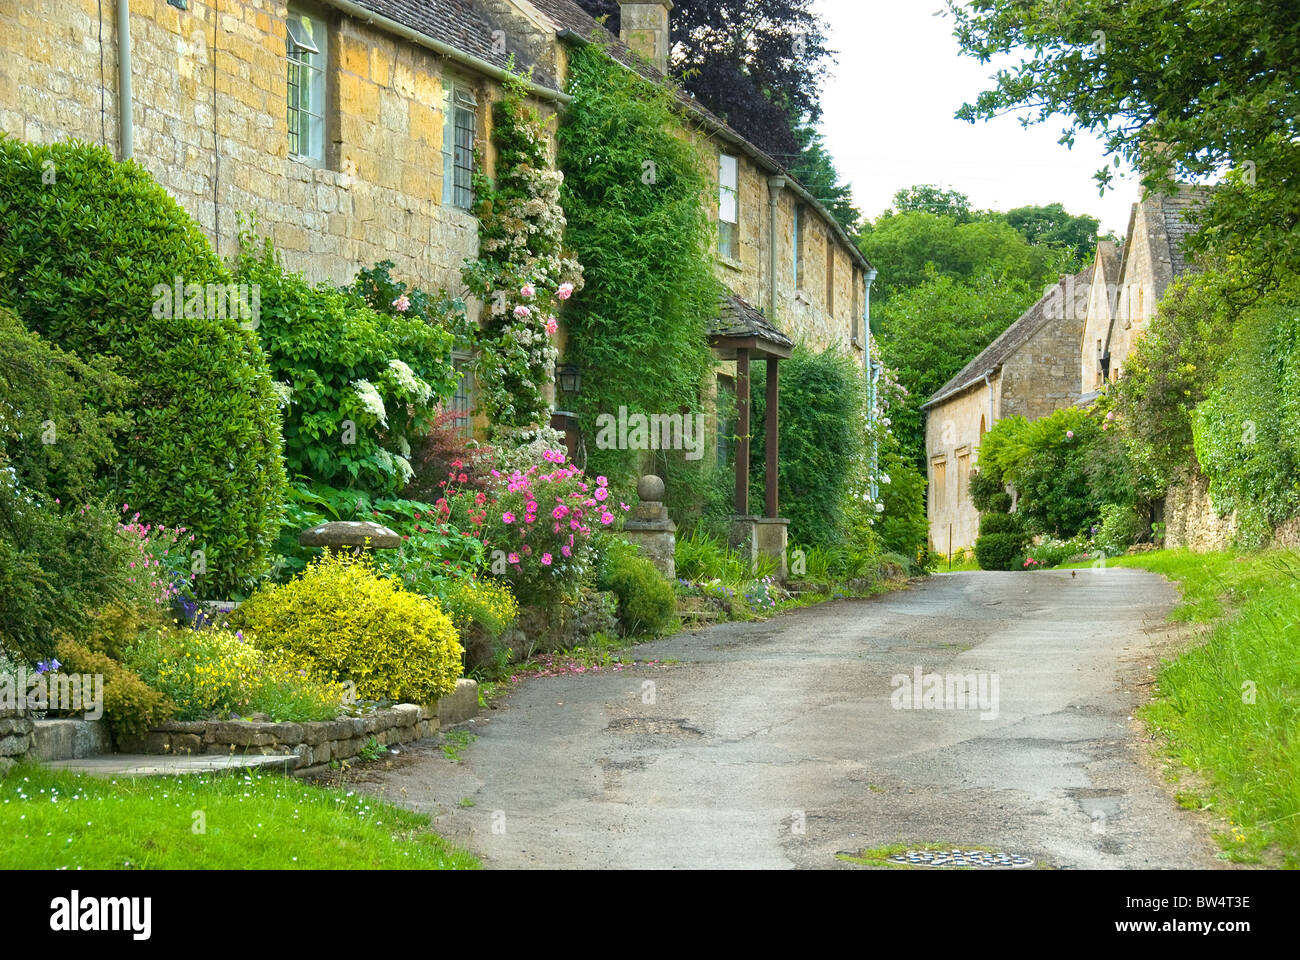 Row of houses and lane, Broad Campden, Cotswolds, Cotswold, Gloucestershire, England, United Kingdom, Europe Stock Photo